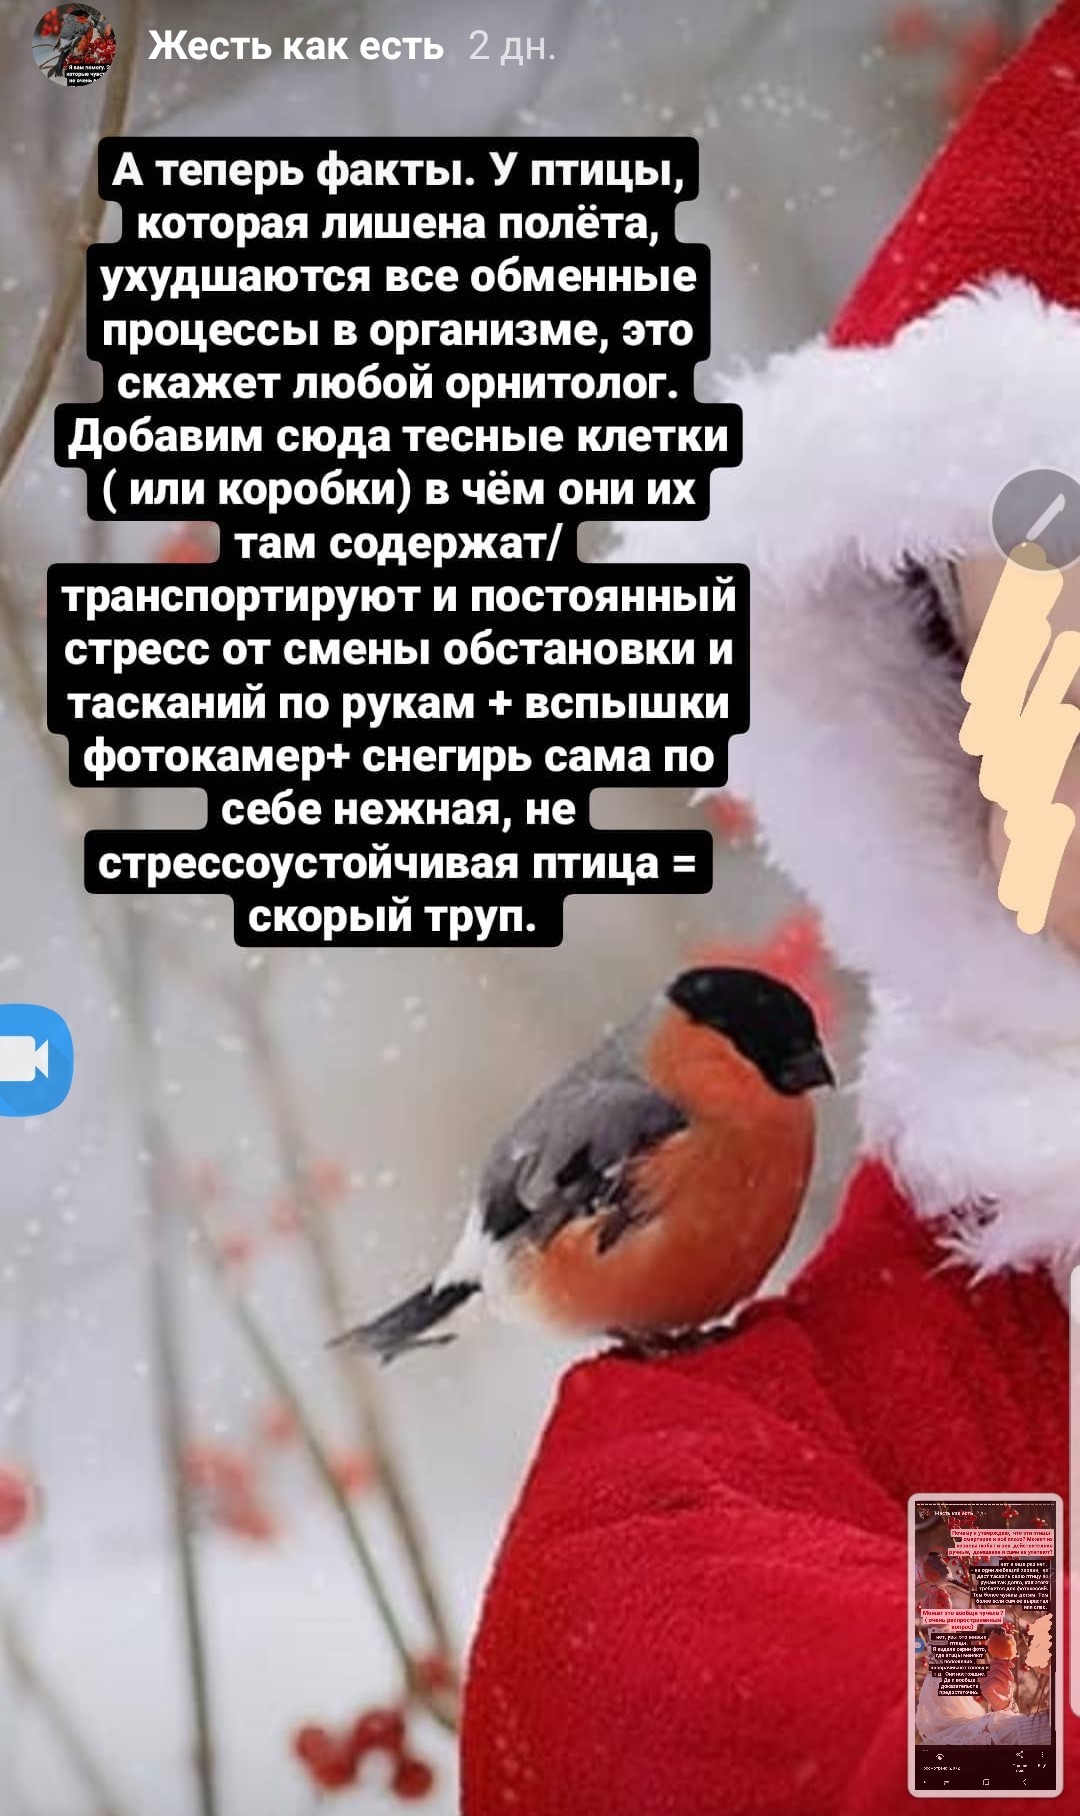 Do you want a photo with a half-corpse bird? - Bullfinches, Birds, Ornithology, Video, Longpost, Picture with text, Cruelty to animals, Negative, PHOTOSESSION